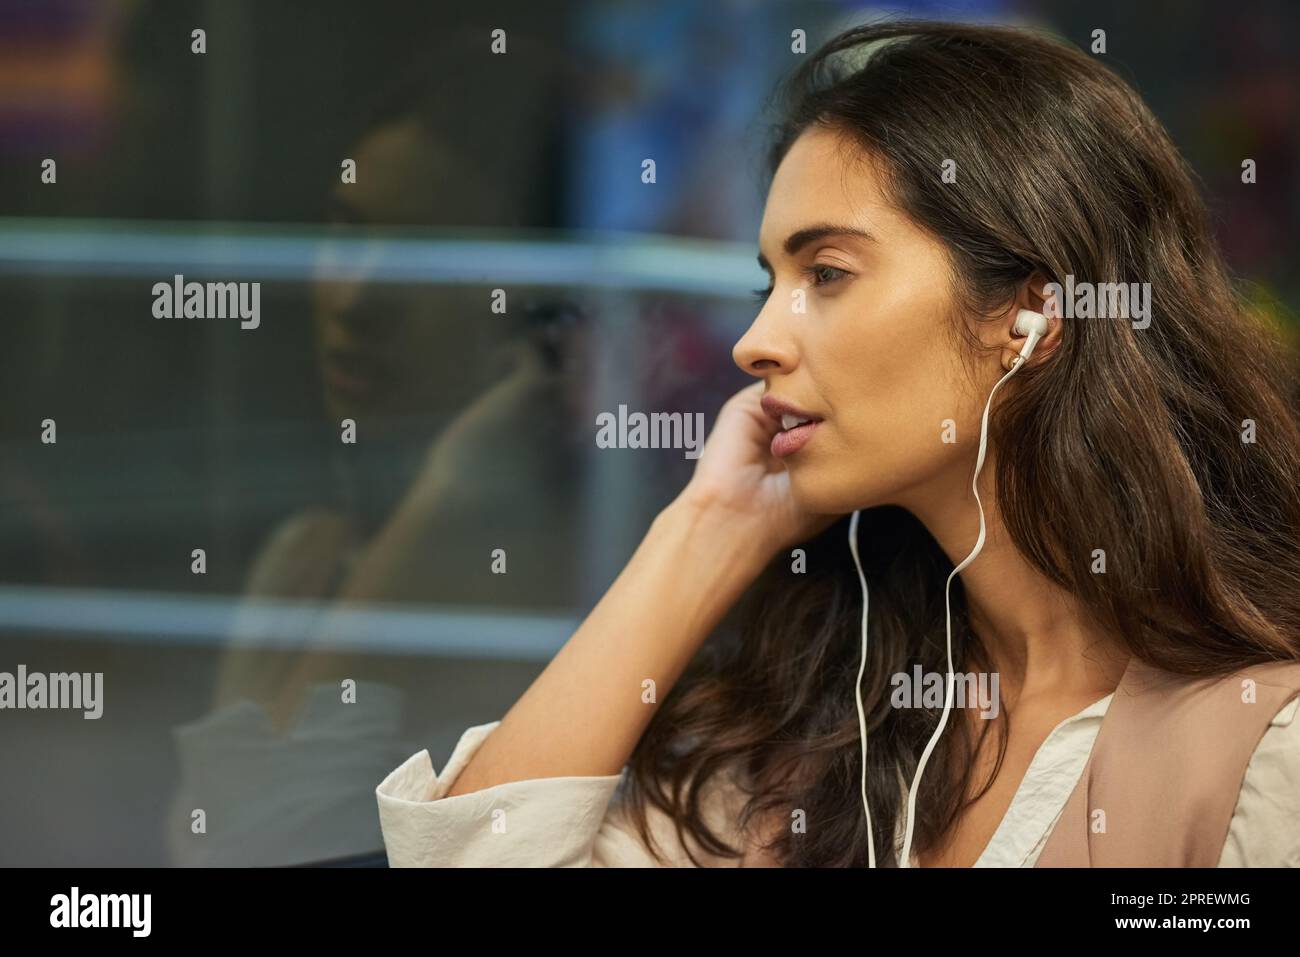 Contemplating on the commute. a young attractive woman listening to music while commuting with the train. Stock Photo